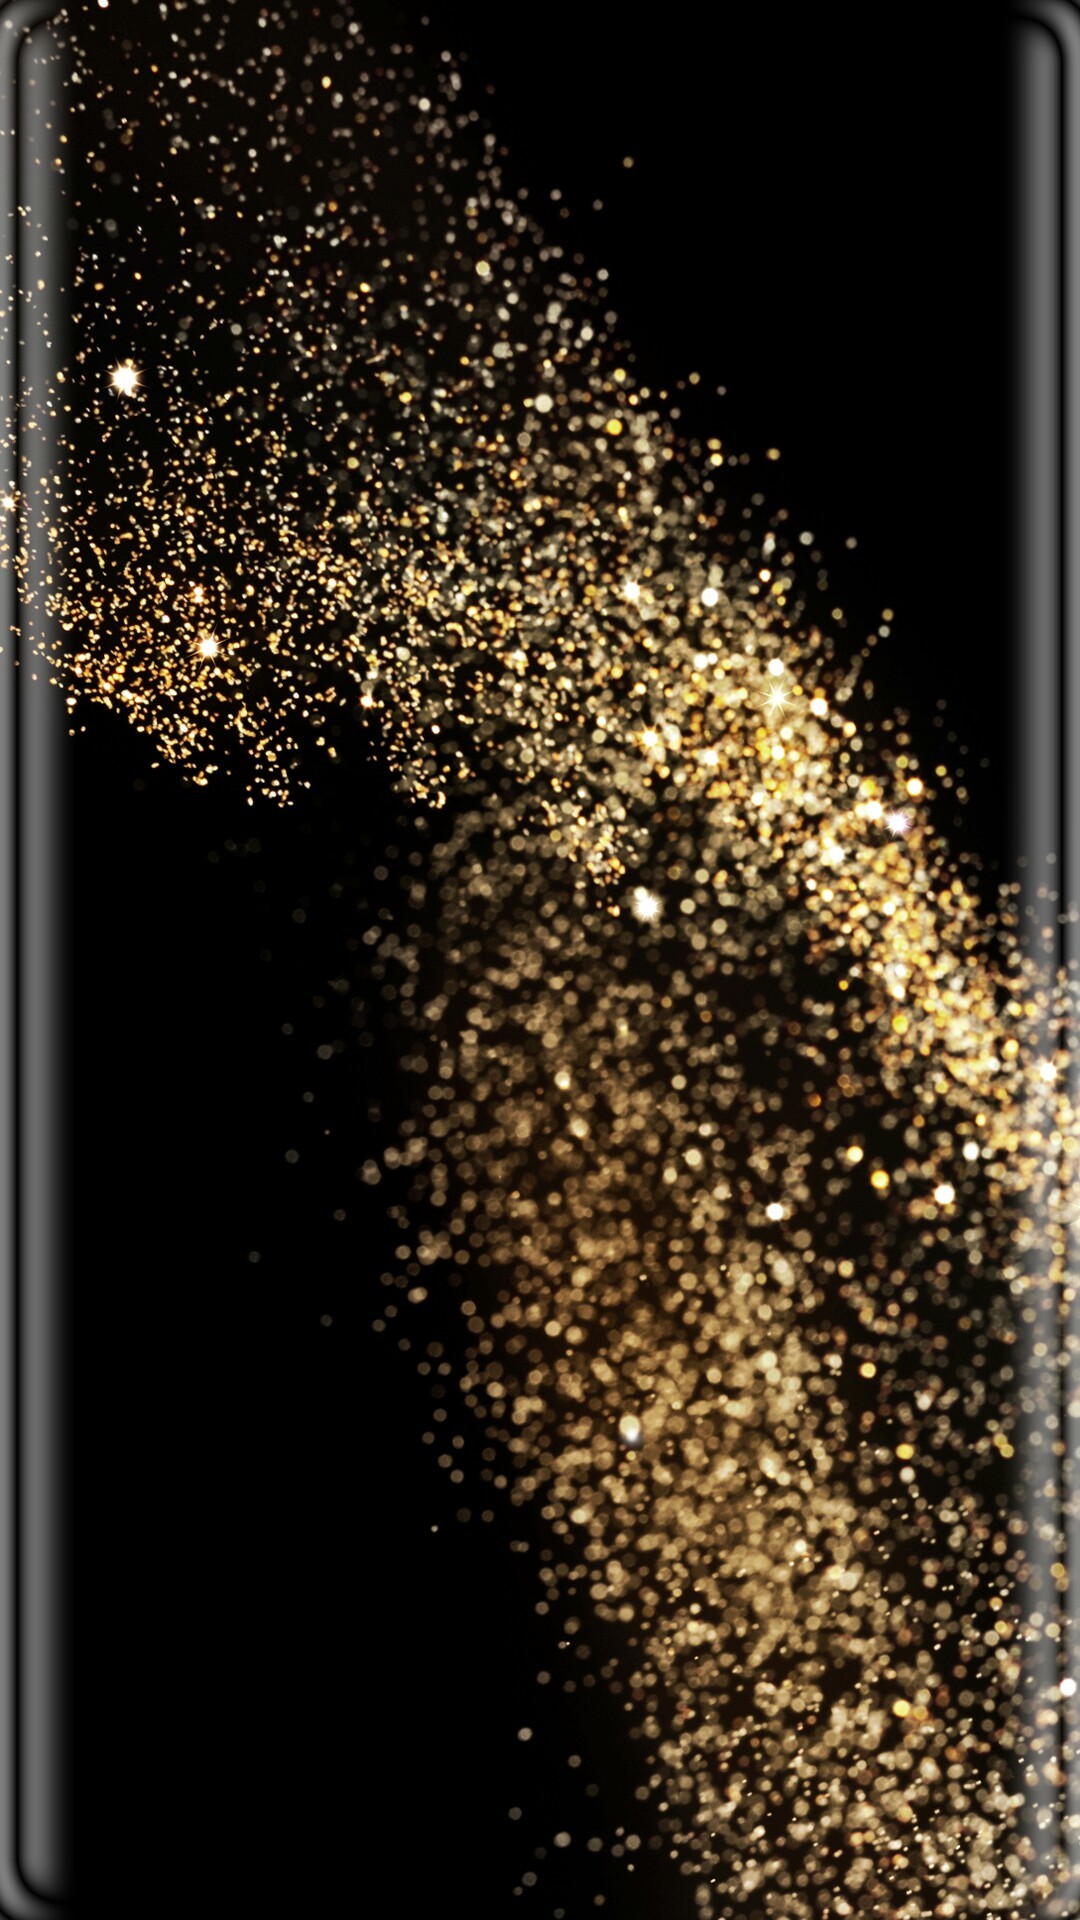 1080x1920 Phone Backgrounds, Wallpaper Backgrounds, Iphone Wallpapers, Wallpaper S, Gold  Glitter, Black Gold, Locks, Android, Cartoons